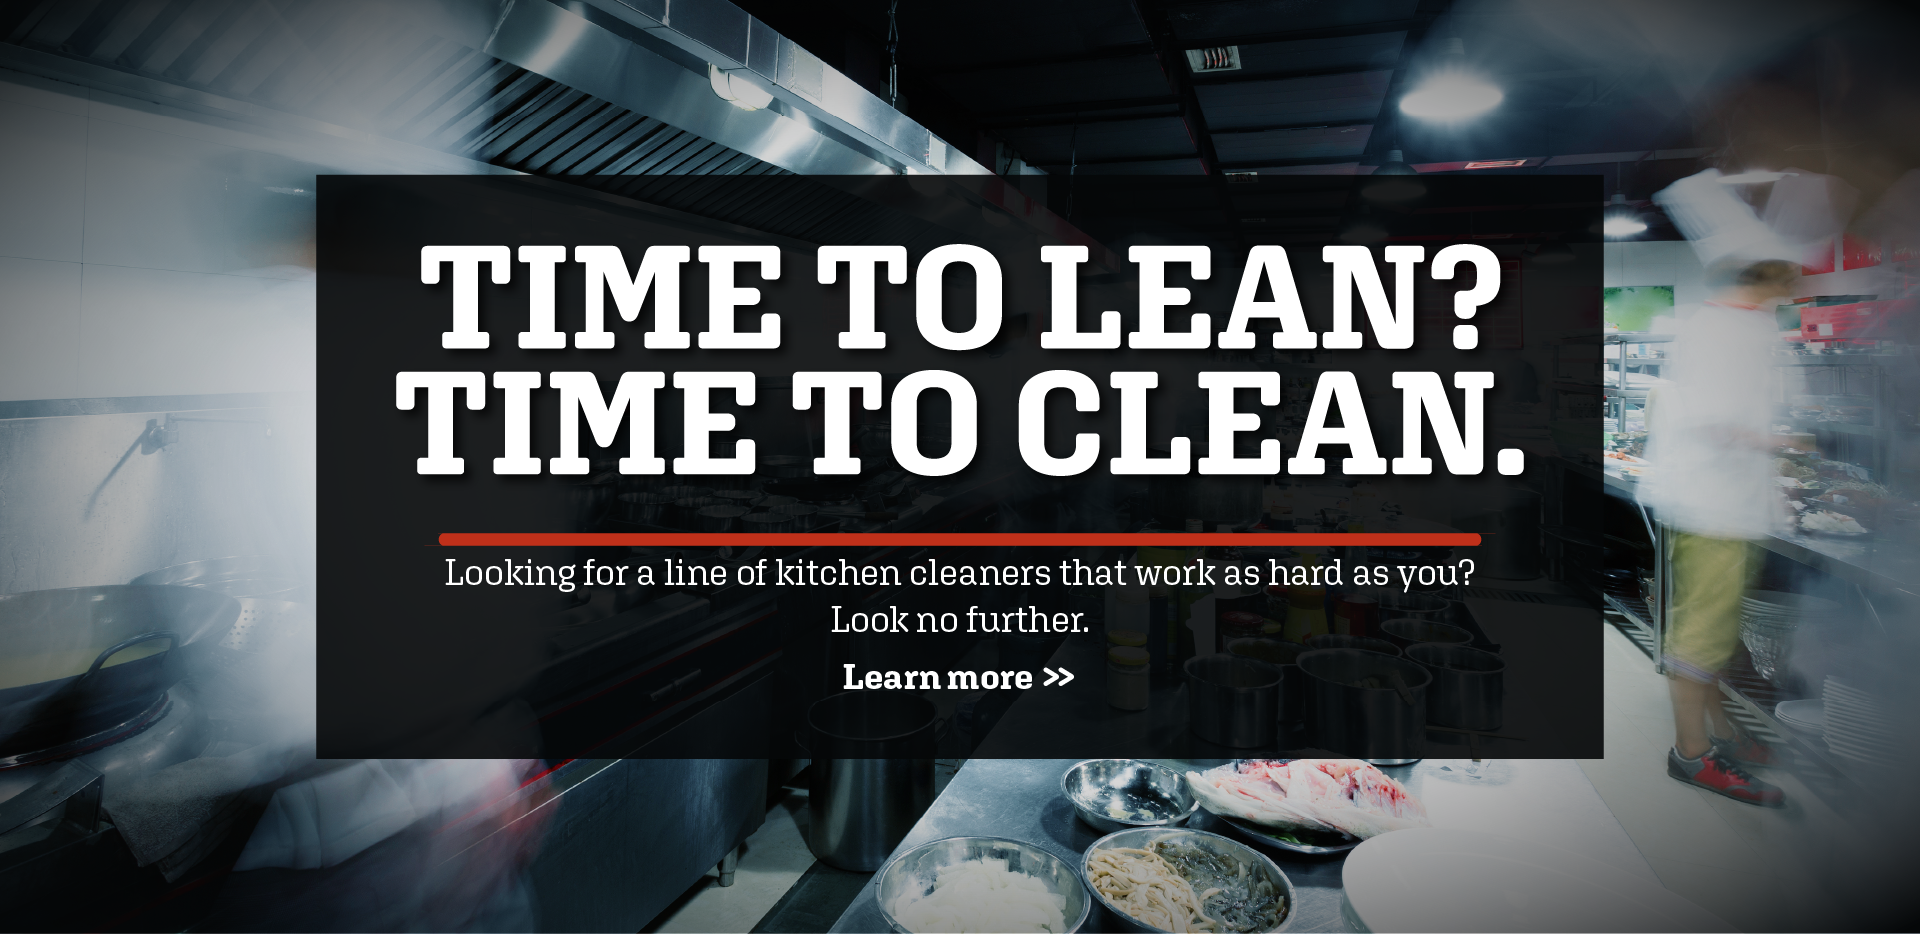 Time to Lean? Time to Clean!